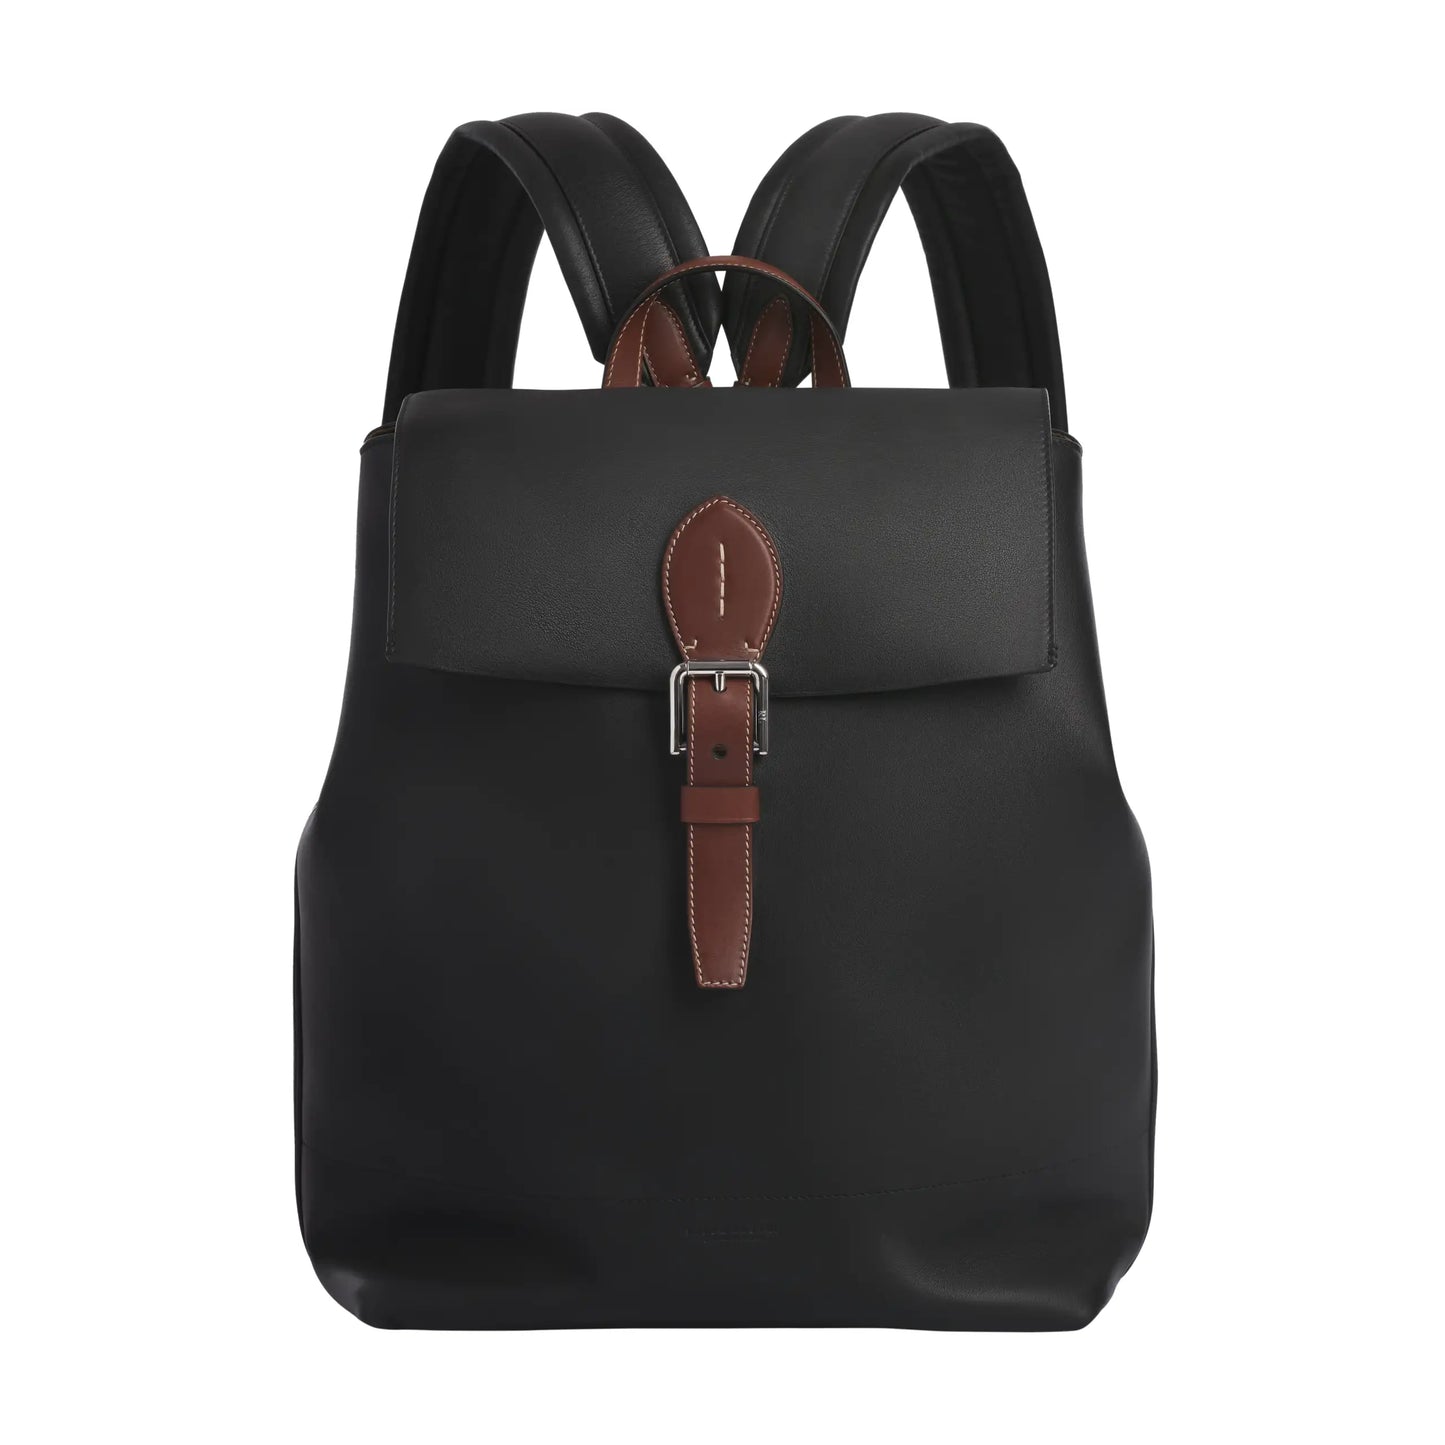 Smooth Calf Leather Backpack in Black with Brown Details